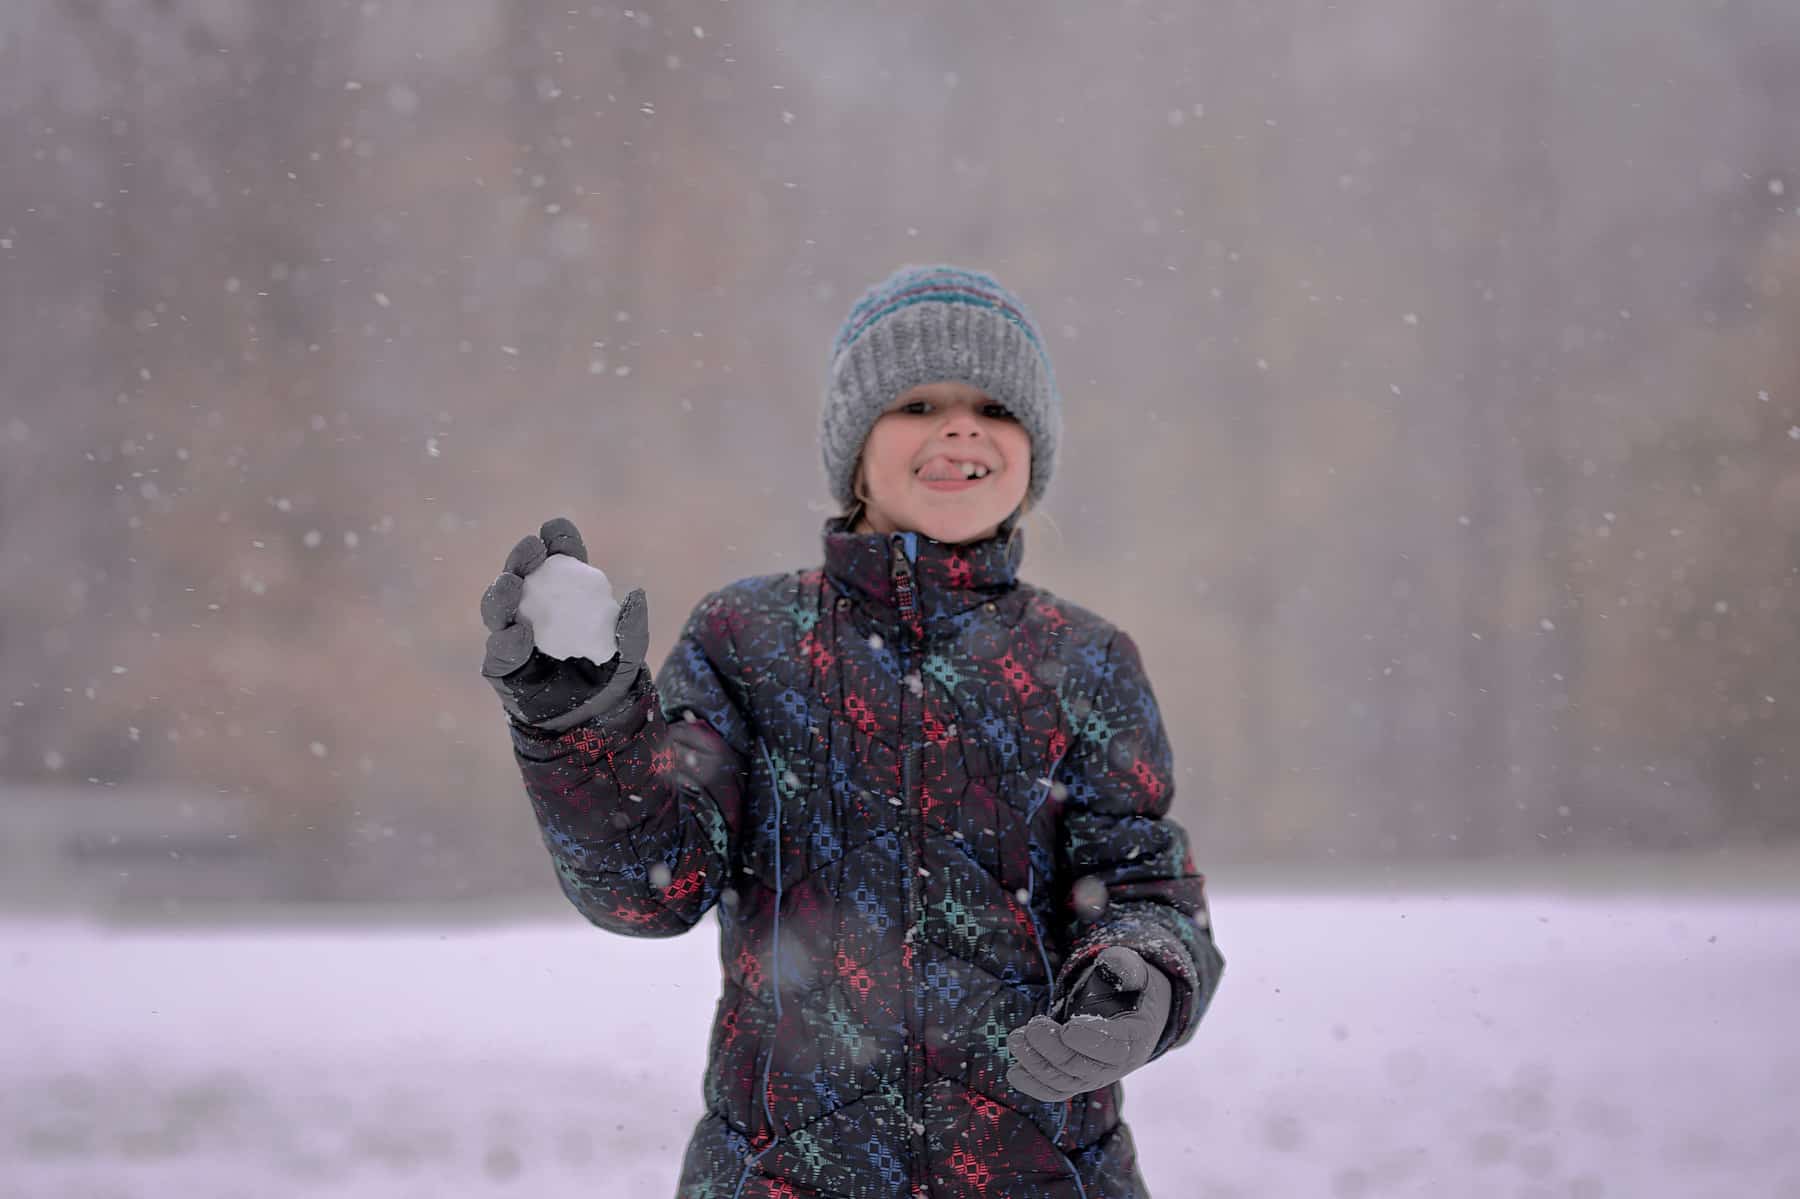 Gear Review: Best Kids' Gloves and Mittens for Outdoor Play